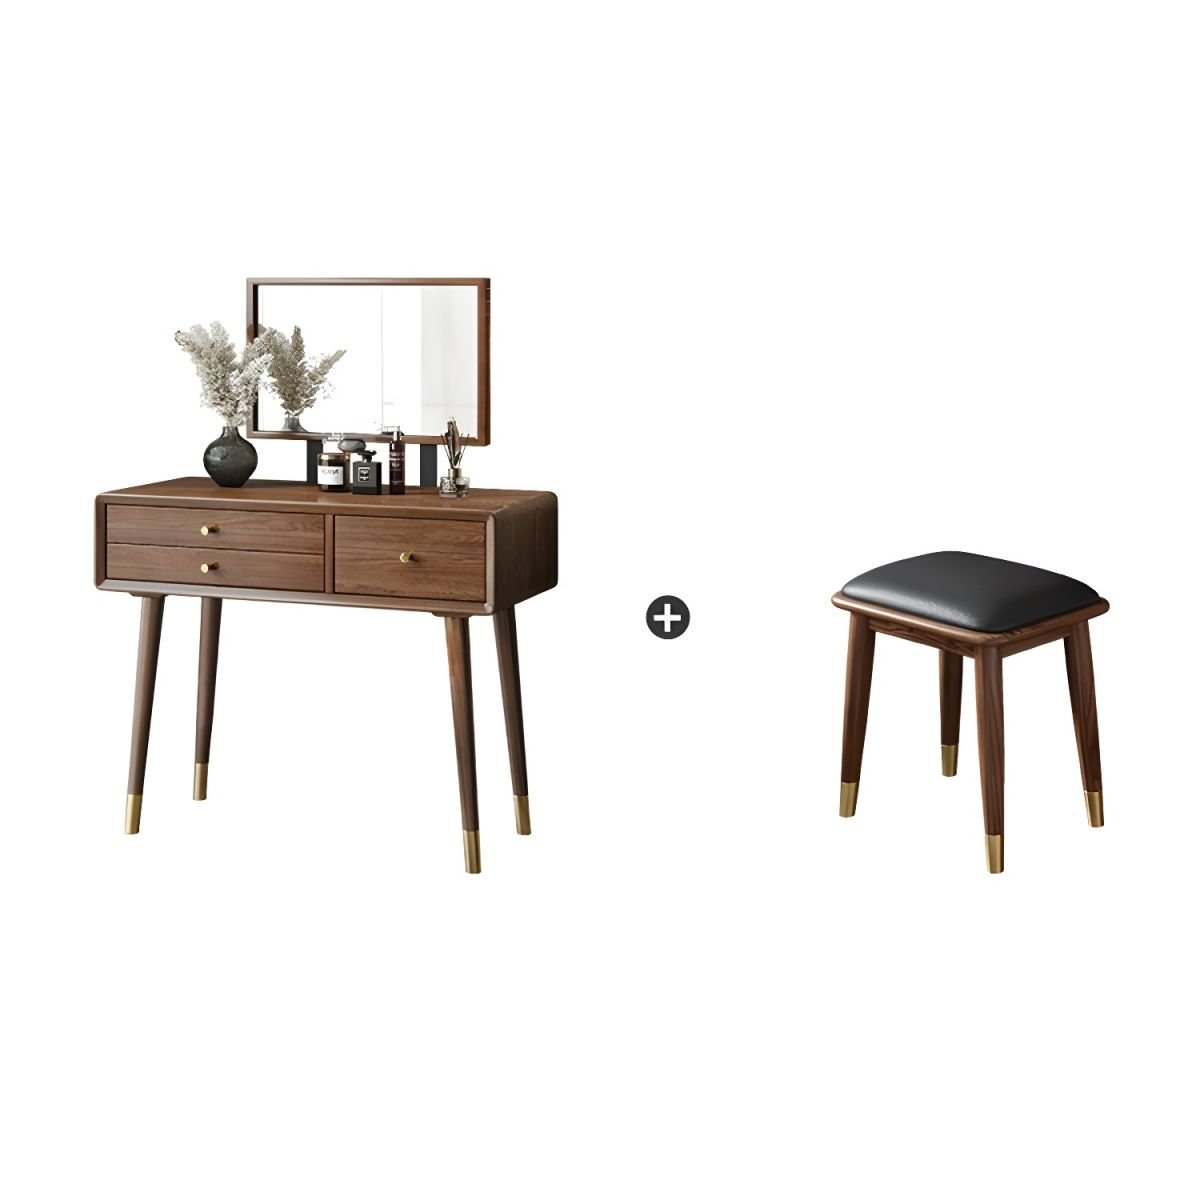 Cocoa Standard Minimalist Dressing Table Timber with Adjustable Mirror and Seat, Makeup Vanity & Mirror & Stools